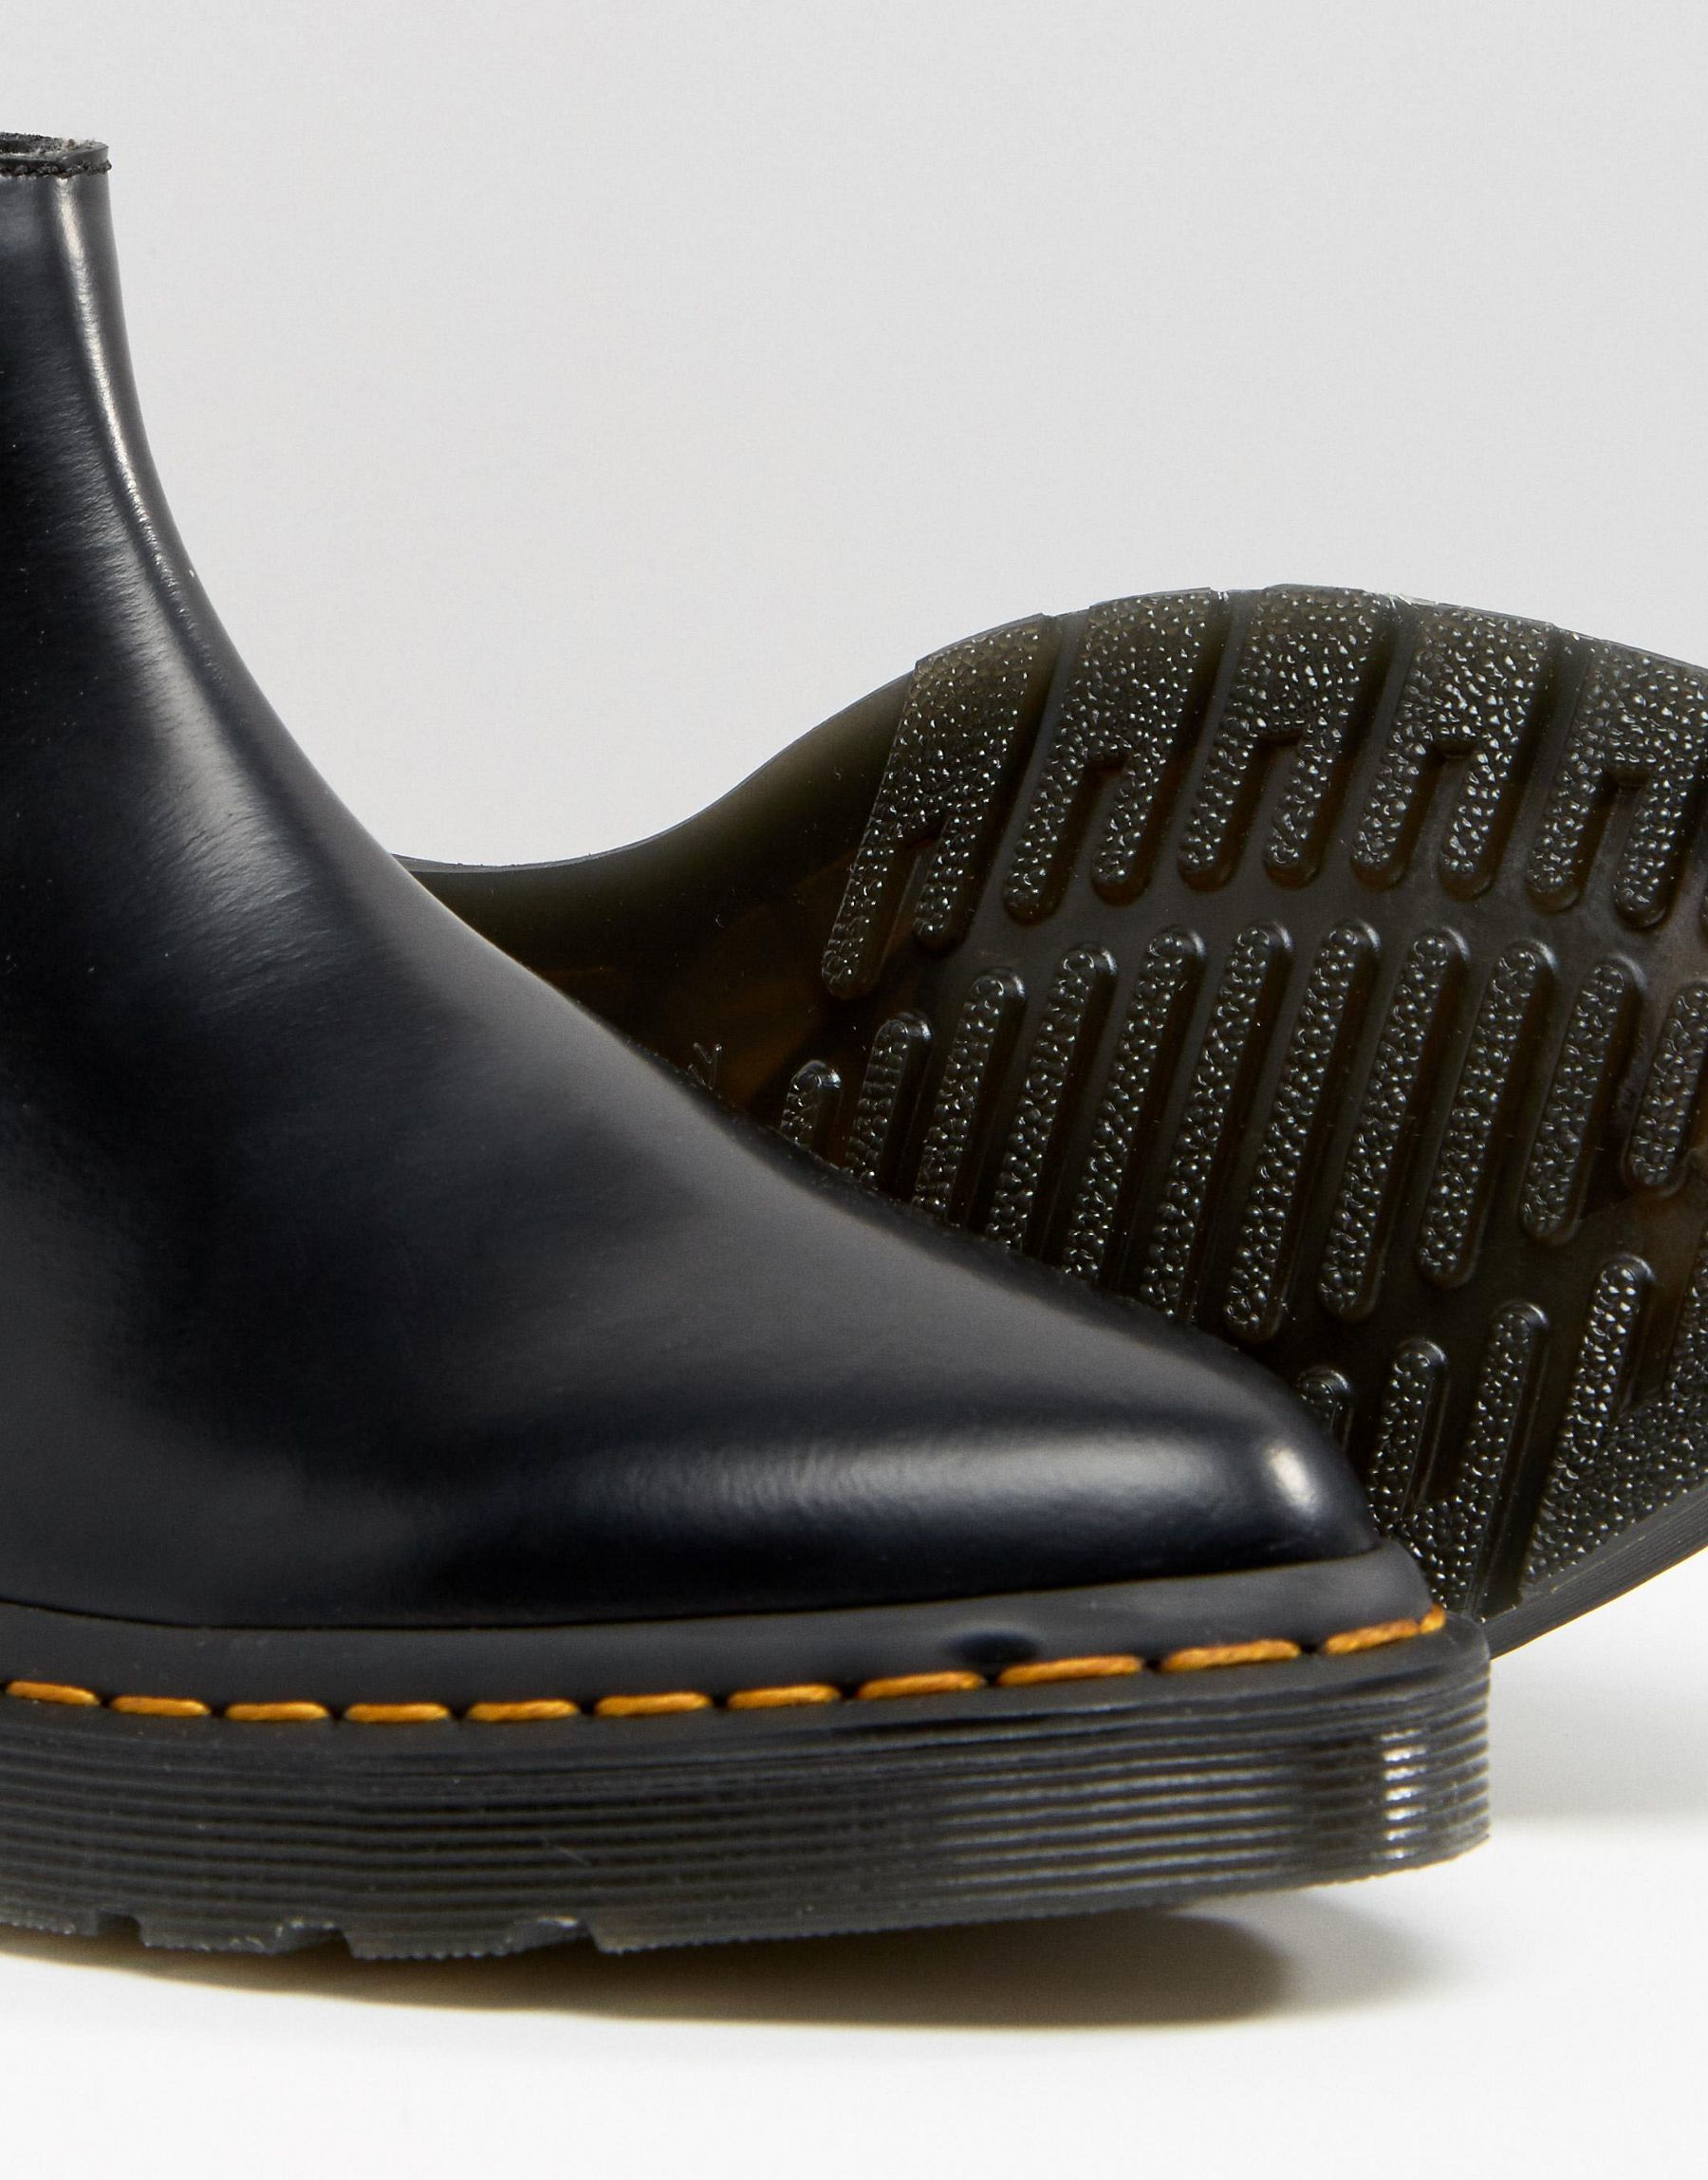 Dr. Martens Leather Bianca Black Chelsea Boots | Lyst